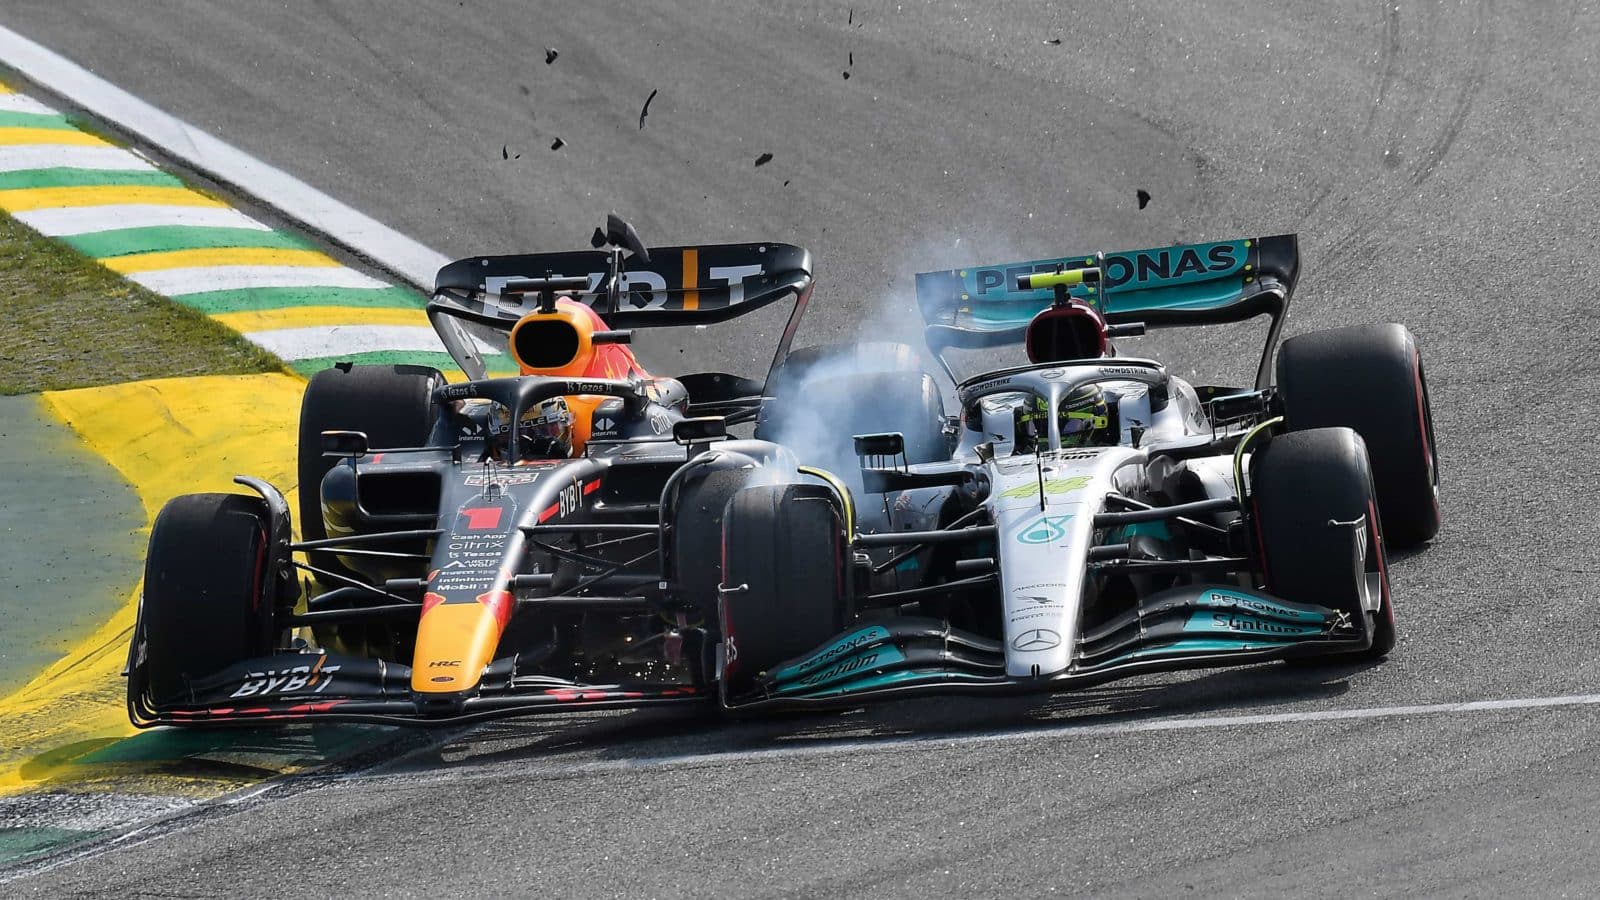 Lewis and Max collide